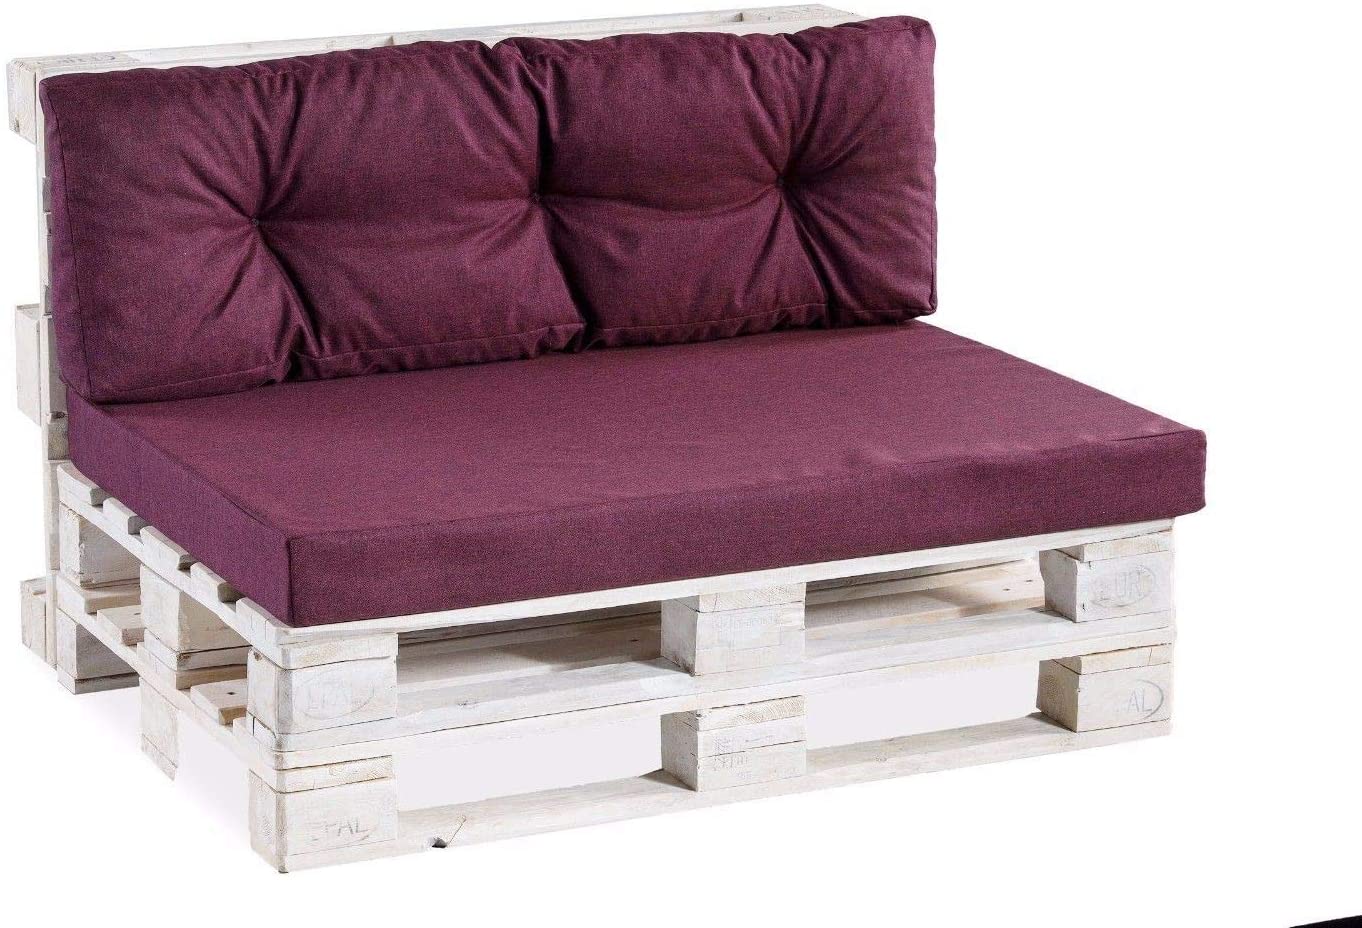 Pallet Cushion, Seat Cushion Or Backrest For Sofas Pallets For European Pal